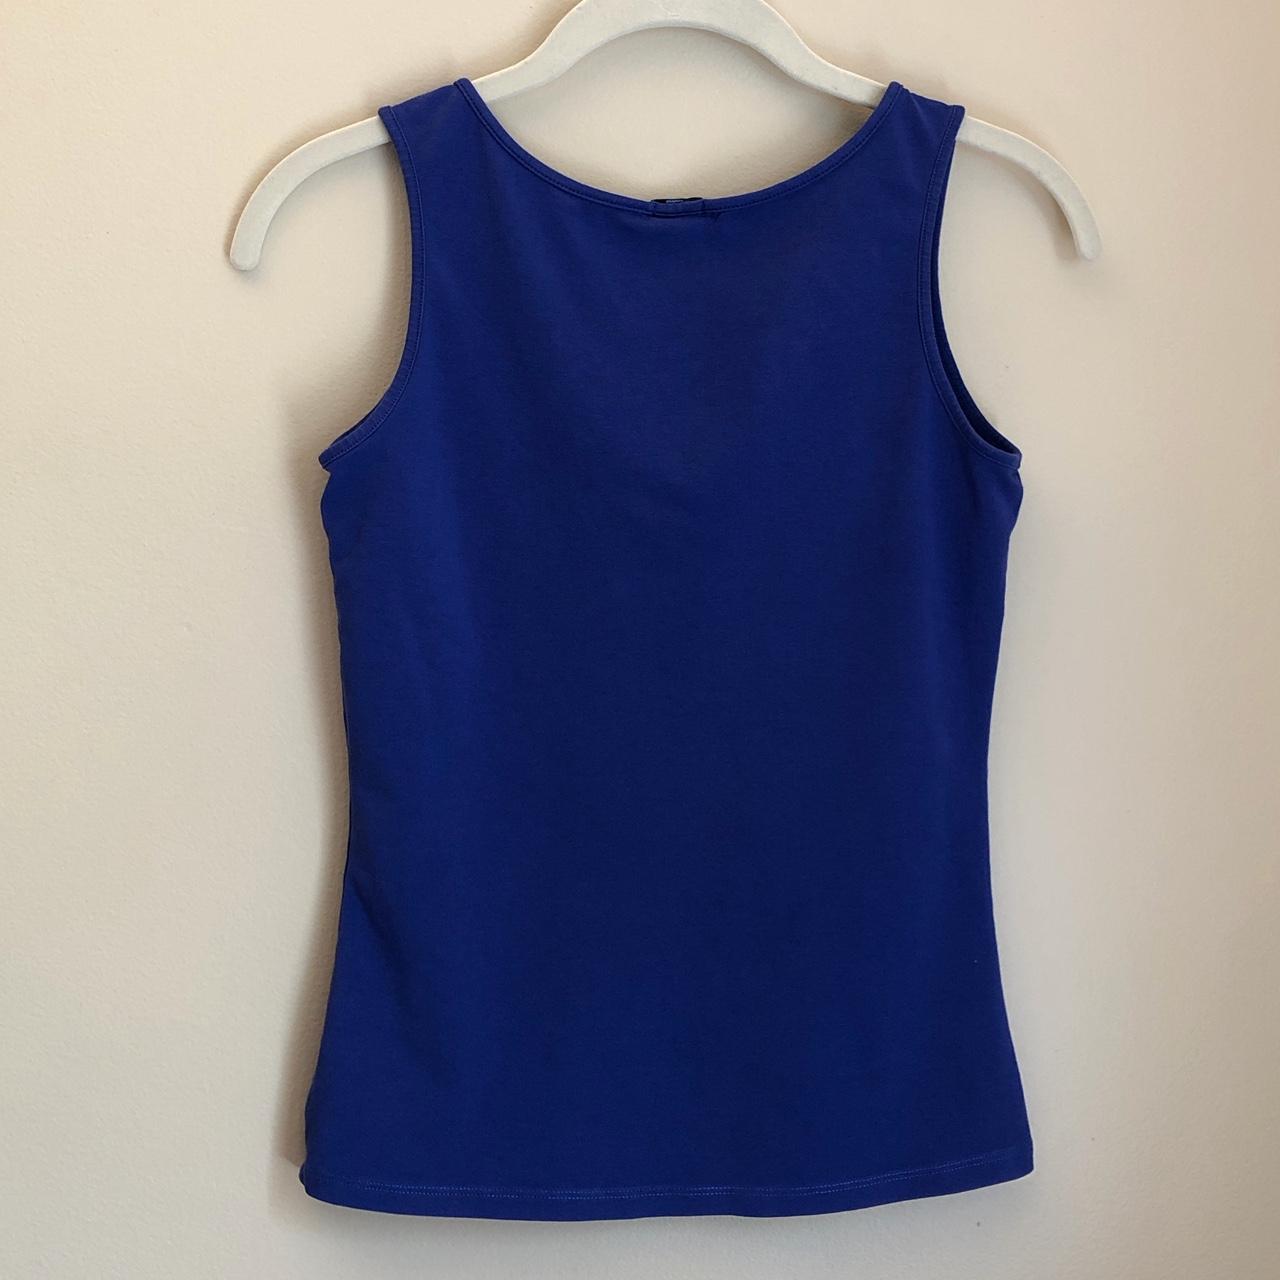 ‼️ DEPOP PAYMENTS ONLY! ‼️ Y2K Blue Tank Top ⭐️ from... - Depop